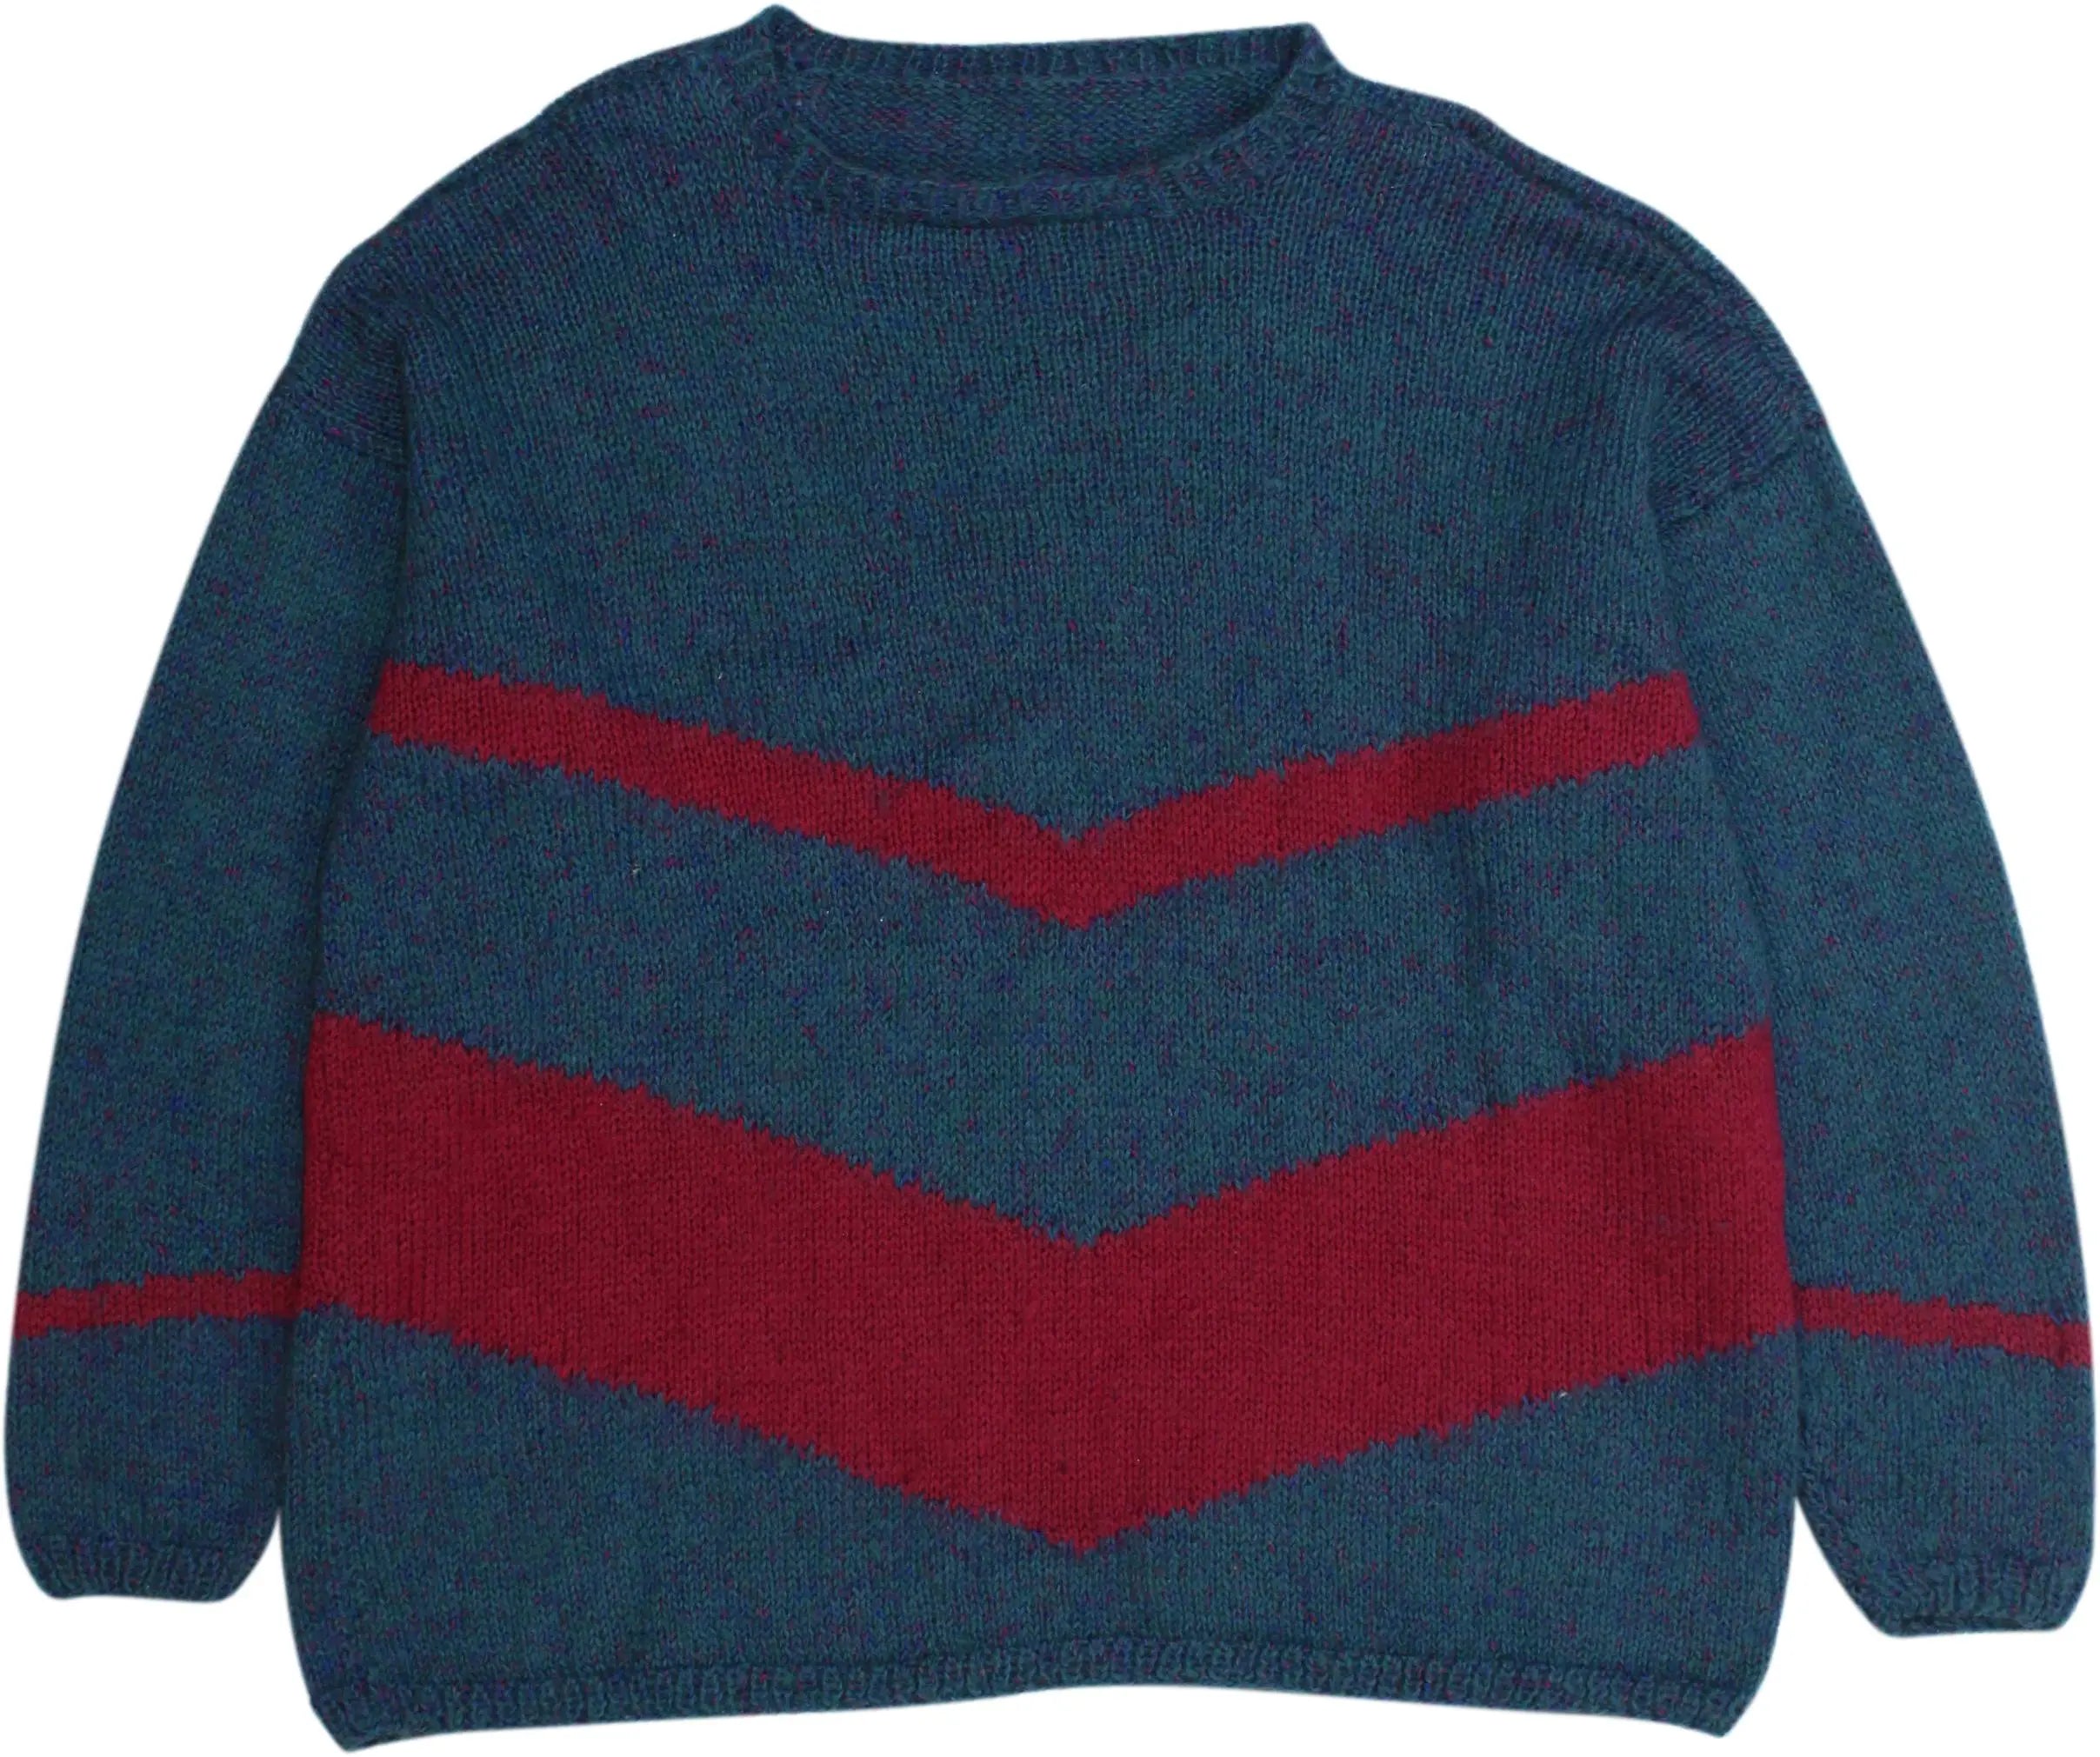 Handmade - Handmade Knitted Sweater- ThriftTale.com - Vintage and second handclothing